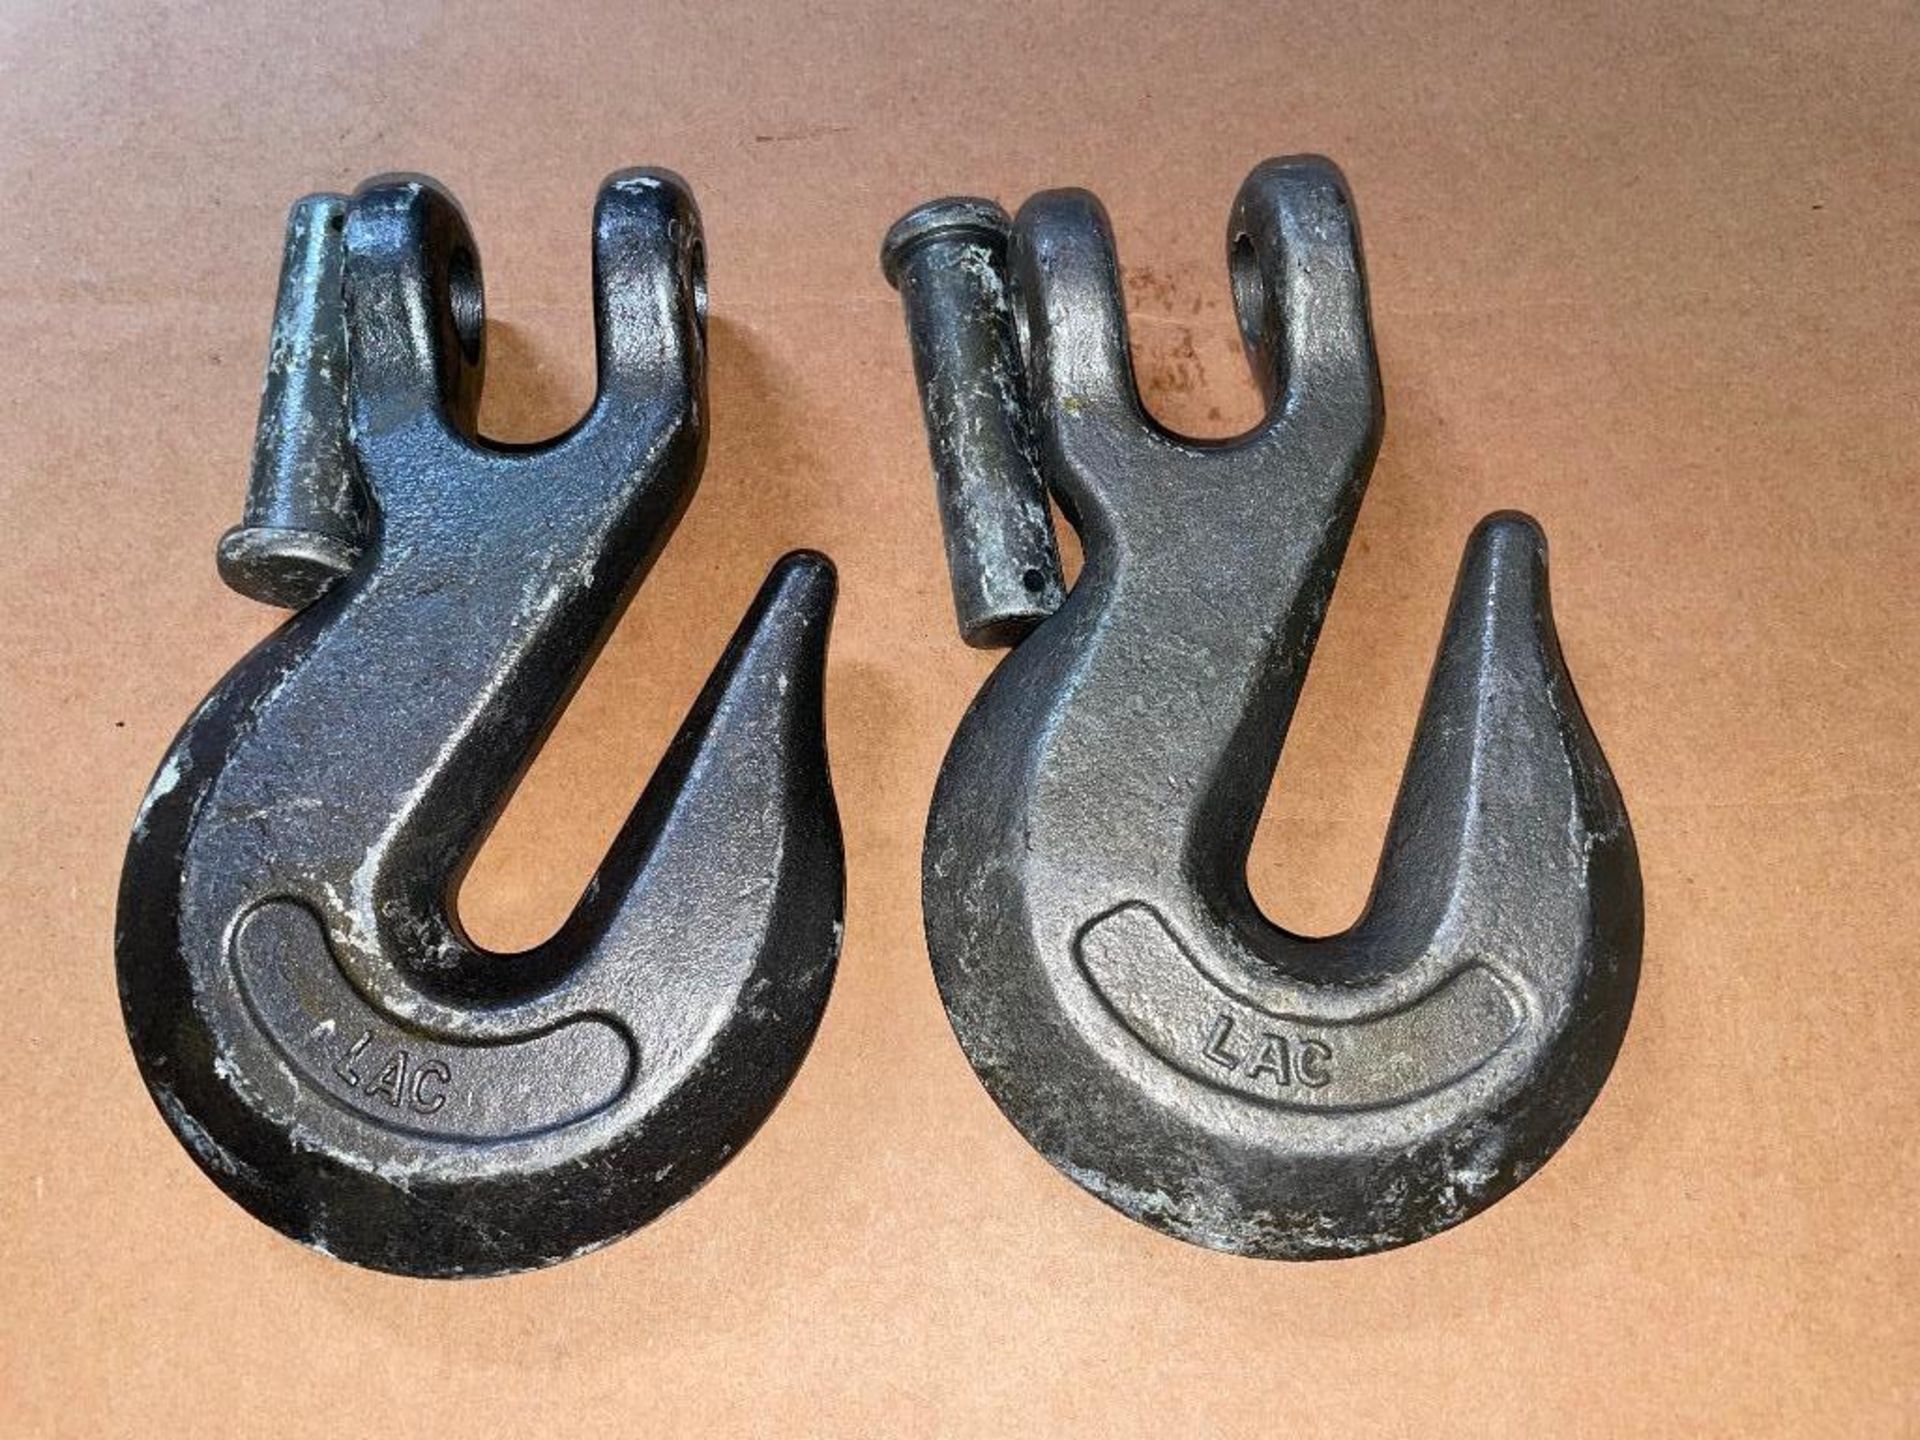 (10) LACLEDE CHAIN FORGED STEEL CLEVIS GRAB HOOKS FOR LOAD BINDINGS BRAND / MODEL: LACLEDE CHAIN ADD - Image 2 of 4